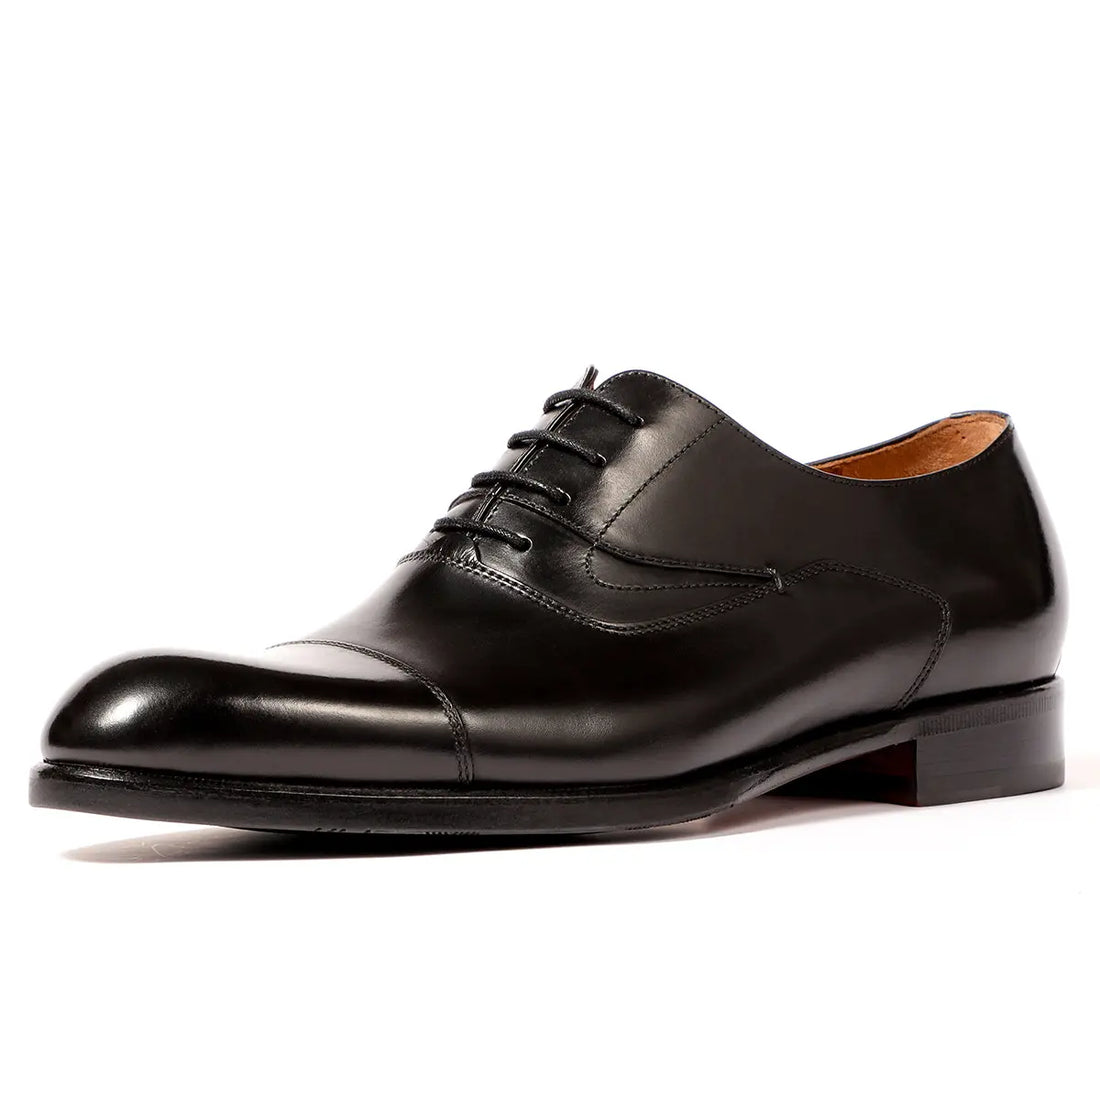 Men's genuine leather high-end business formal suit leather shoes Oxford shoes 97008 Leizilei